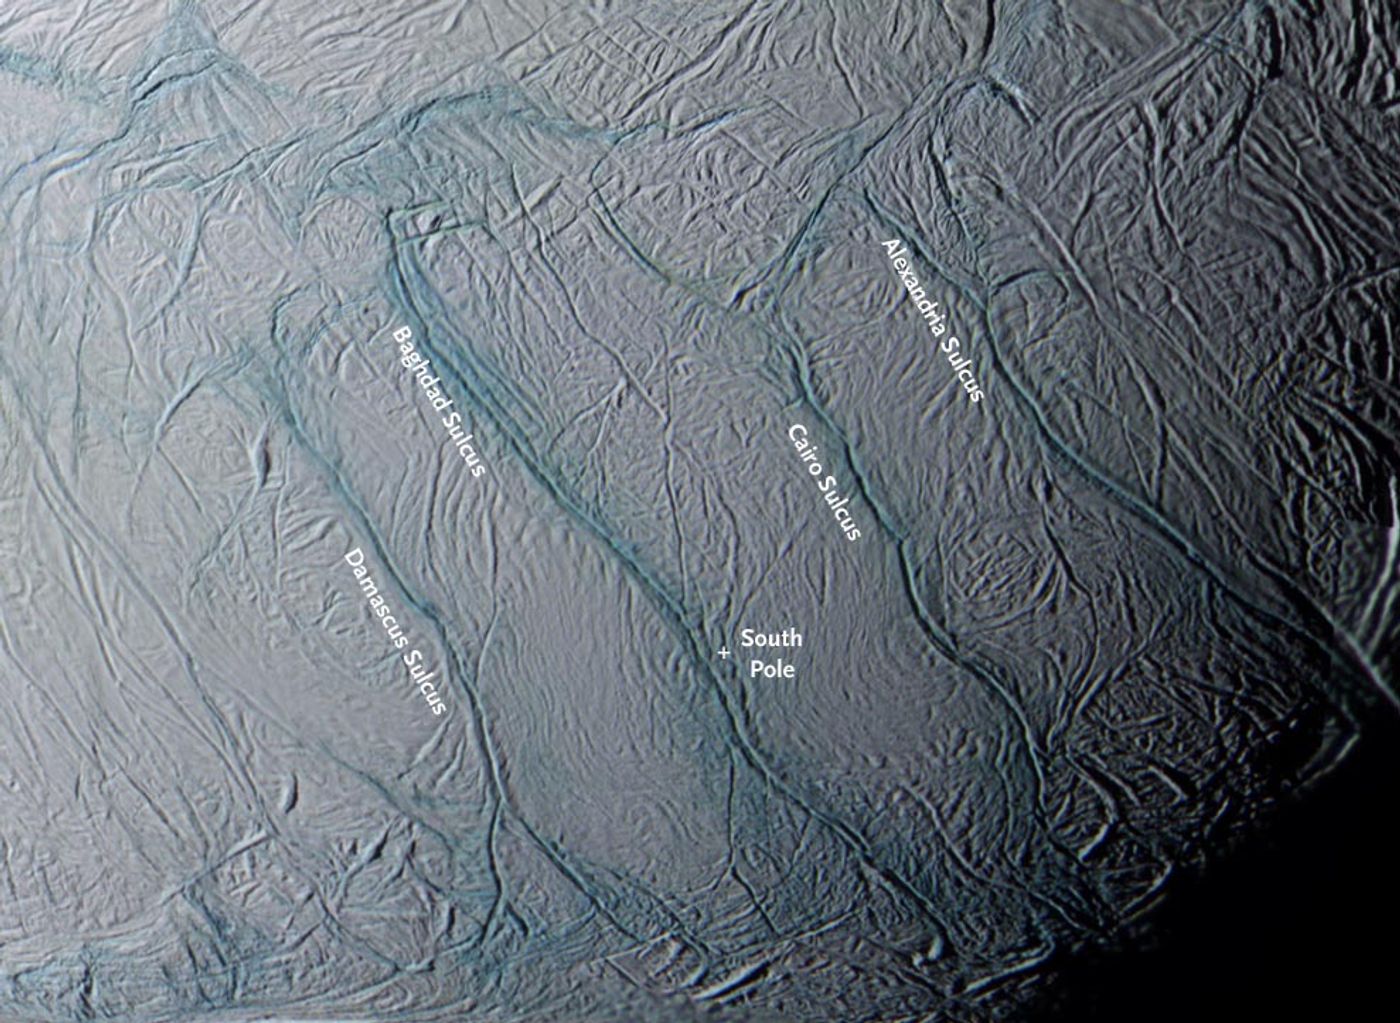 A closeup of the four 80-mile-long rifts(dubbed "tiger stripes") near Enceladus's south pole (white cross). These are the source of its gas-and-particle plumes. Blue tints in this false-color view from Cassini indicate an icy surface covered with coarse grains and boulders. (Credit: NASA/JPL/Space Science Institute/CICLOPS)